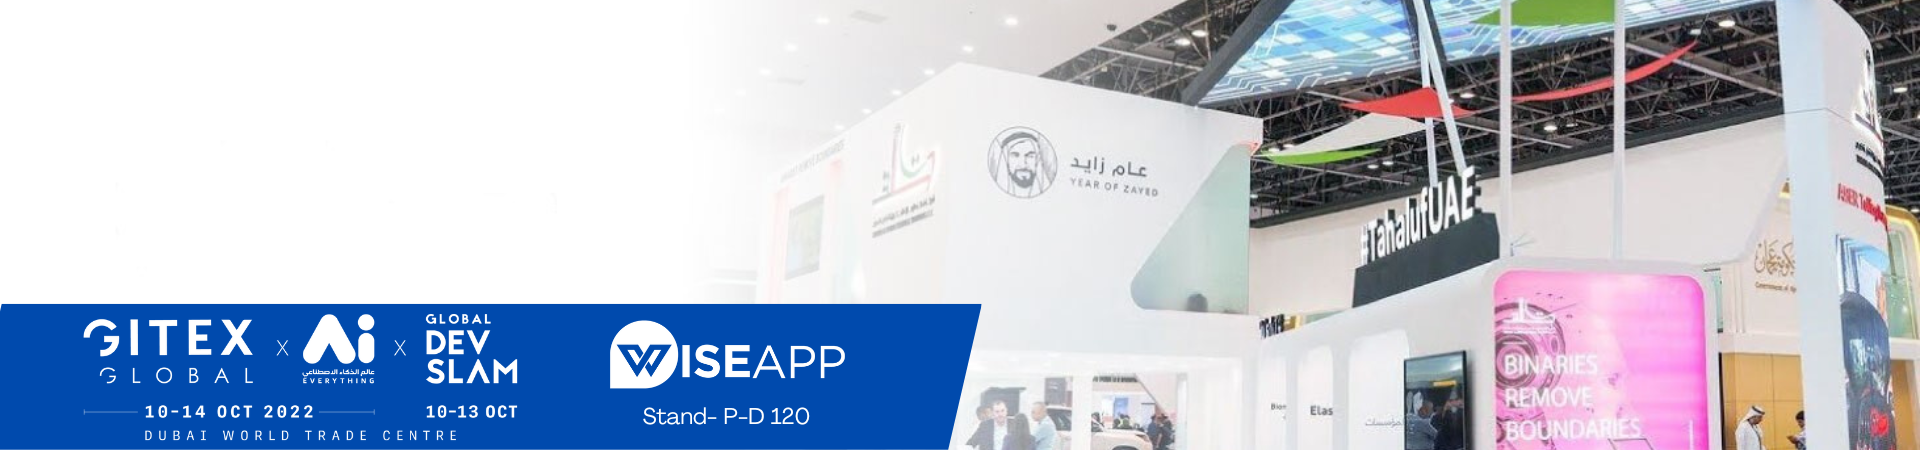 WiseApp is participating for the first time in the GITEX Technology Event